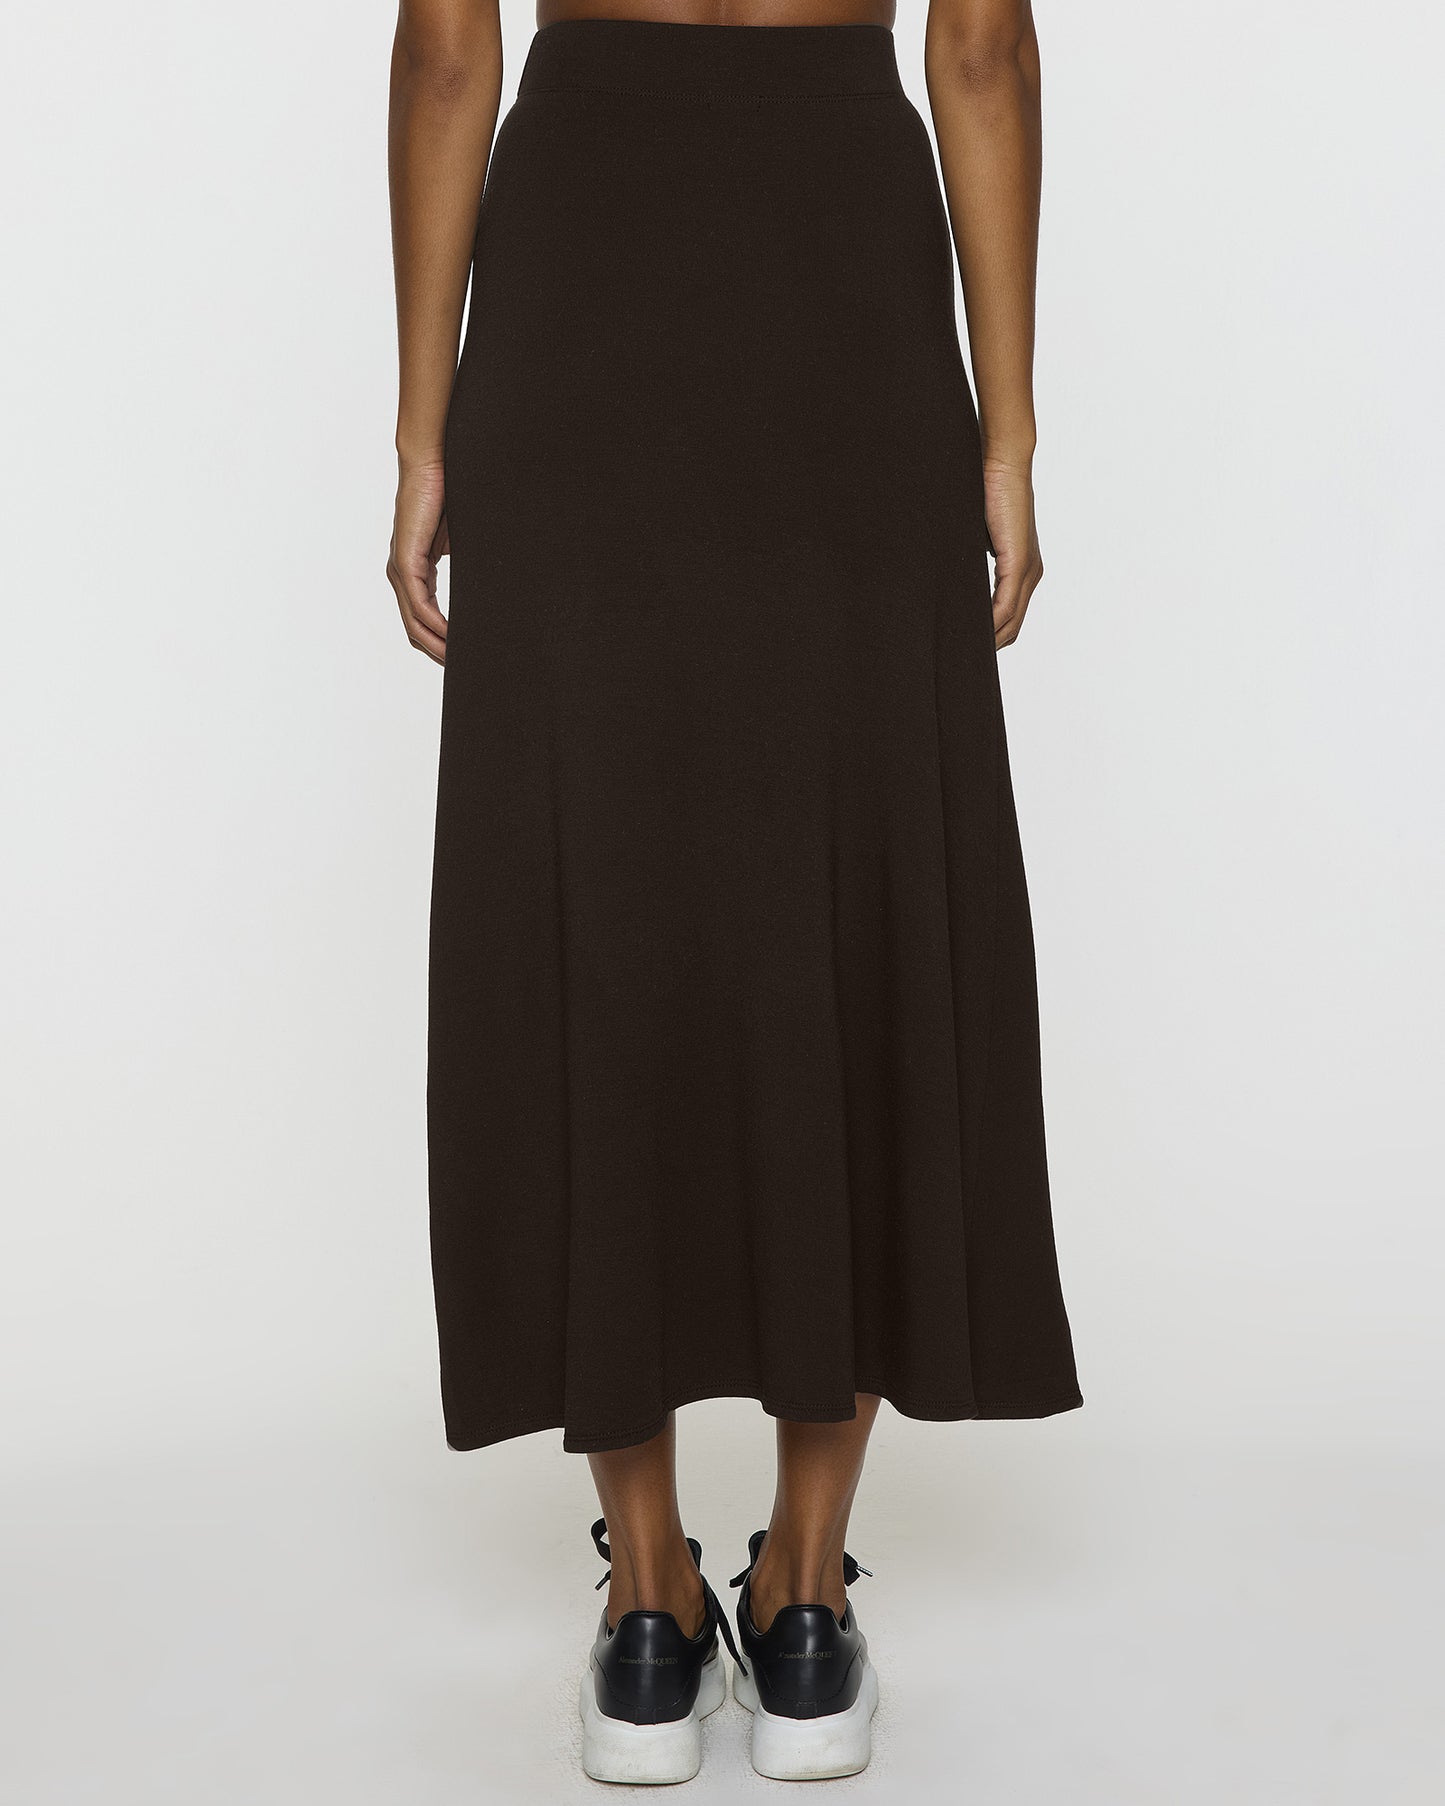 Coco | The Long A-Line Skirt Back